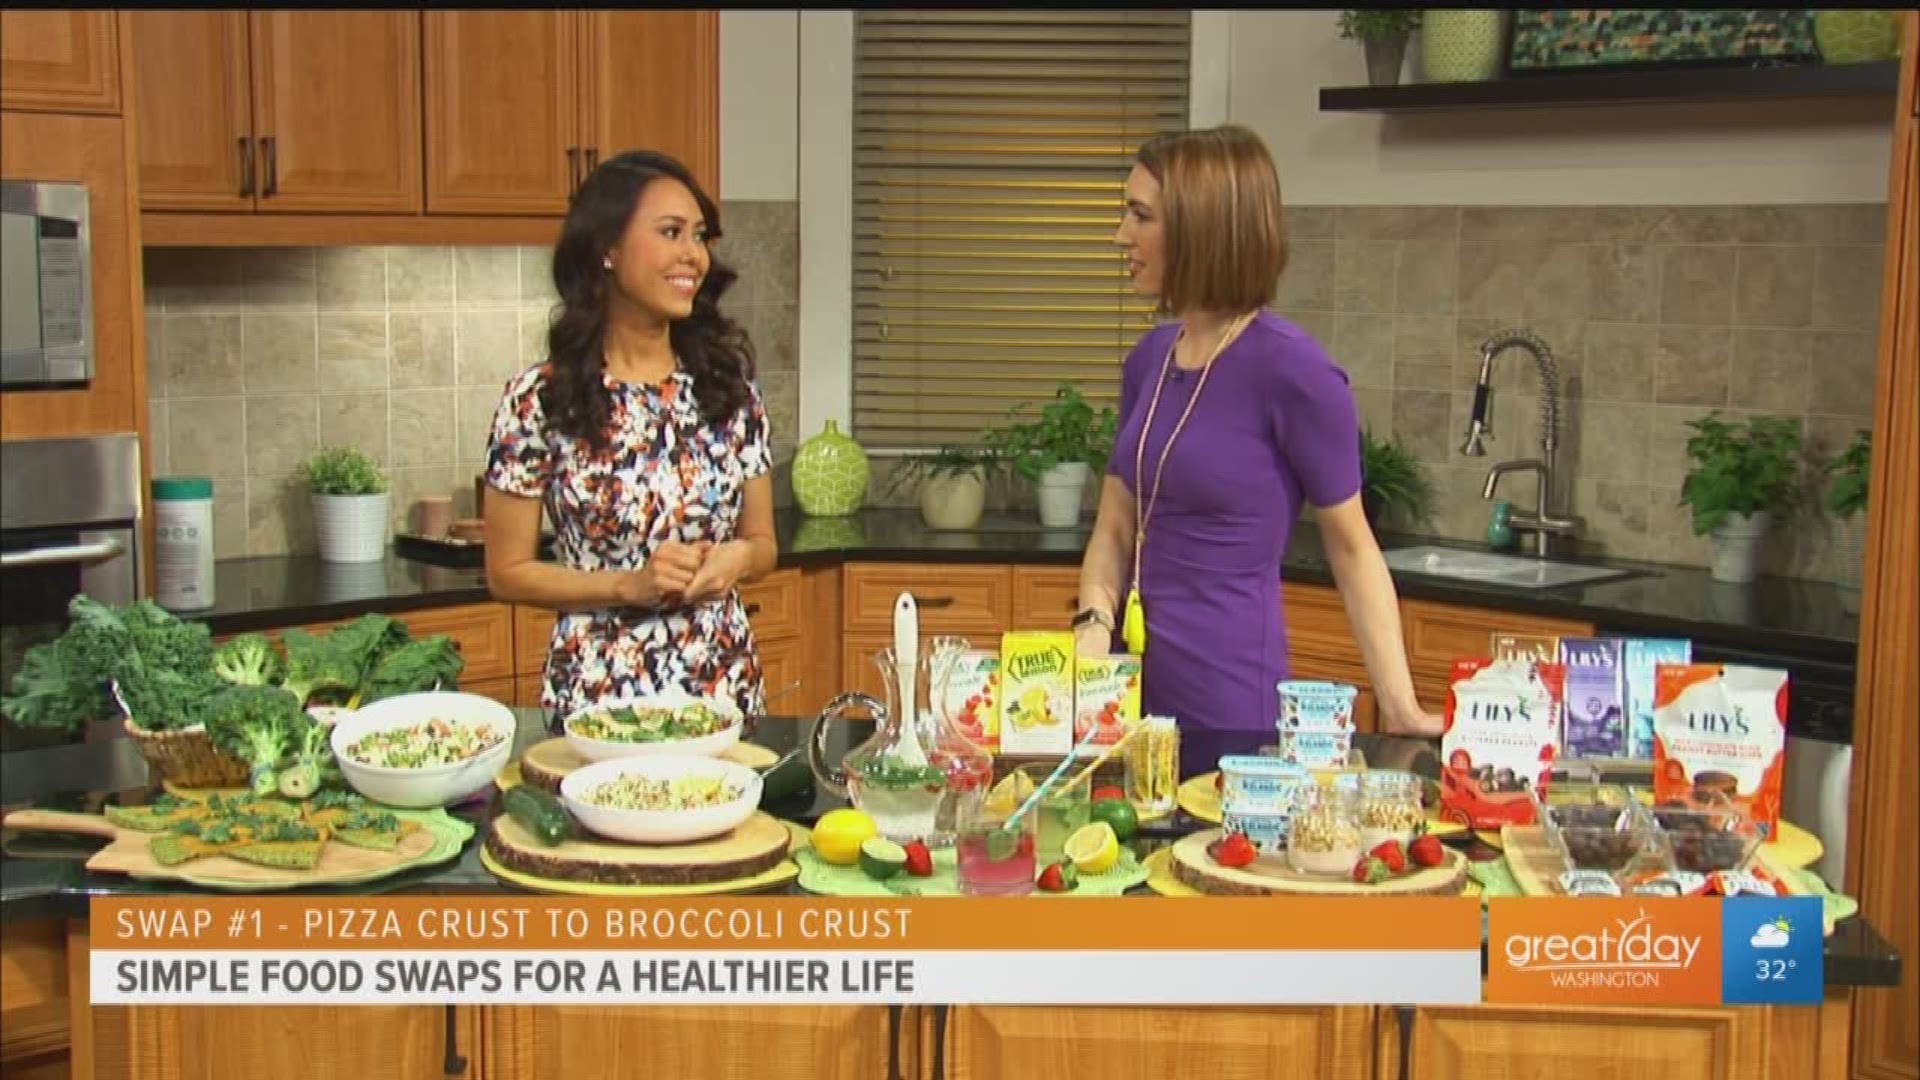 Registered Dietitian, Mia Syn, shares simple but effective food swaps that will help you reach your weight loss goals. For more tips visit nutritionbymia.com.